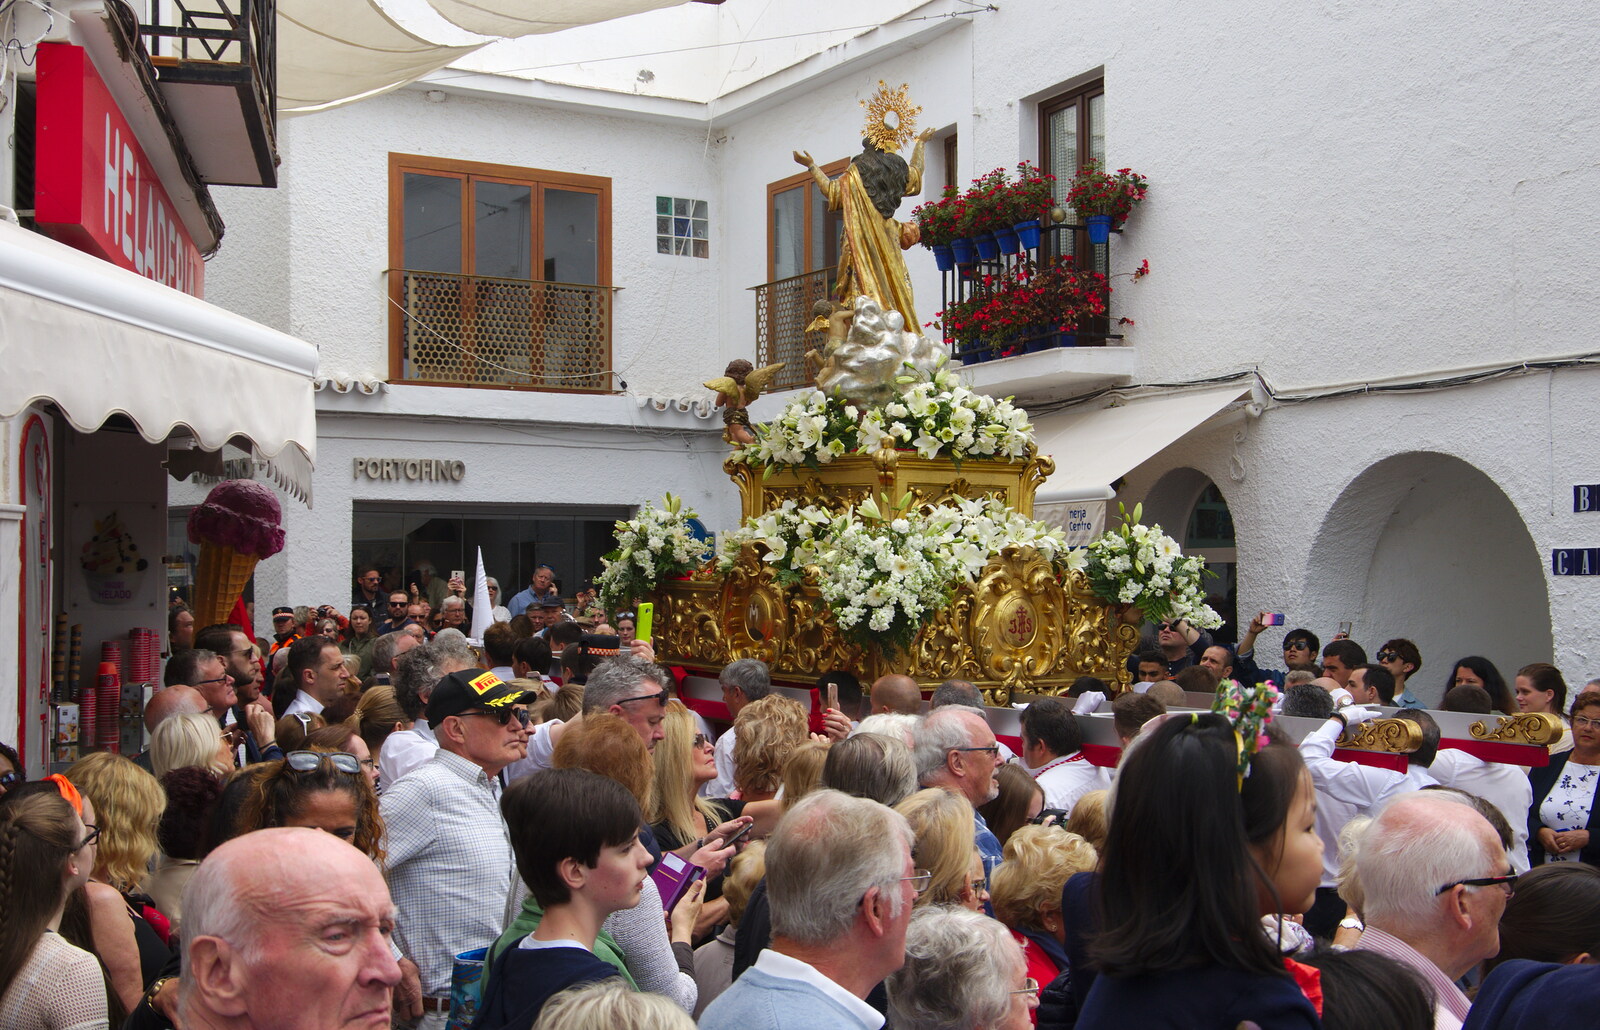 The final status heads off into the lanes from An Easter Parade, Nerja, Andalusia, Spain - 21st April 2019